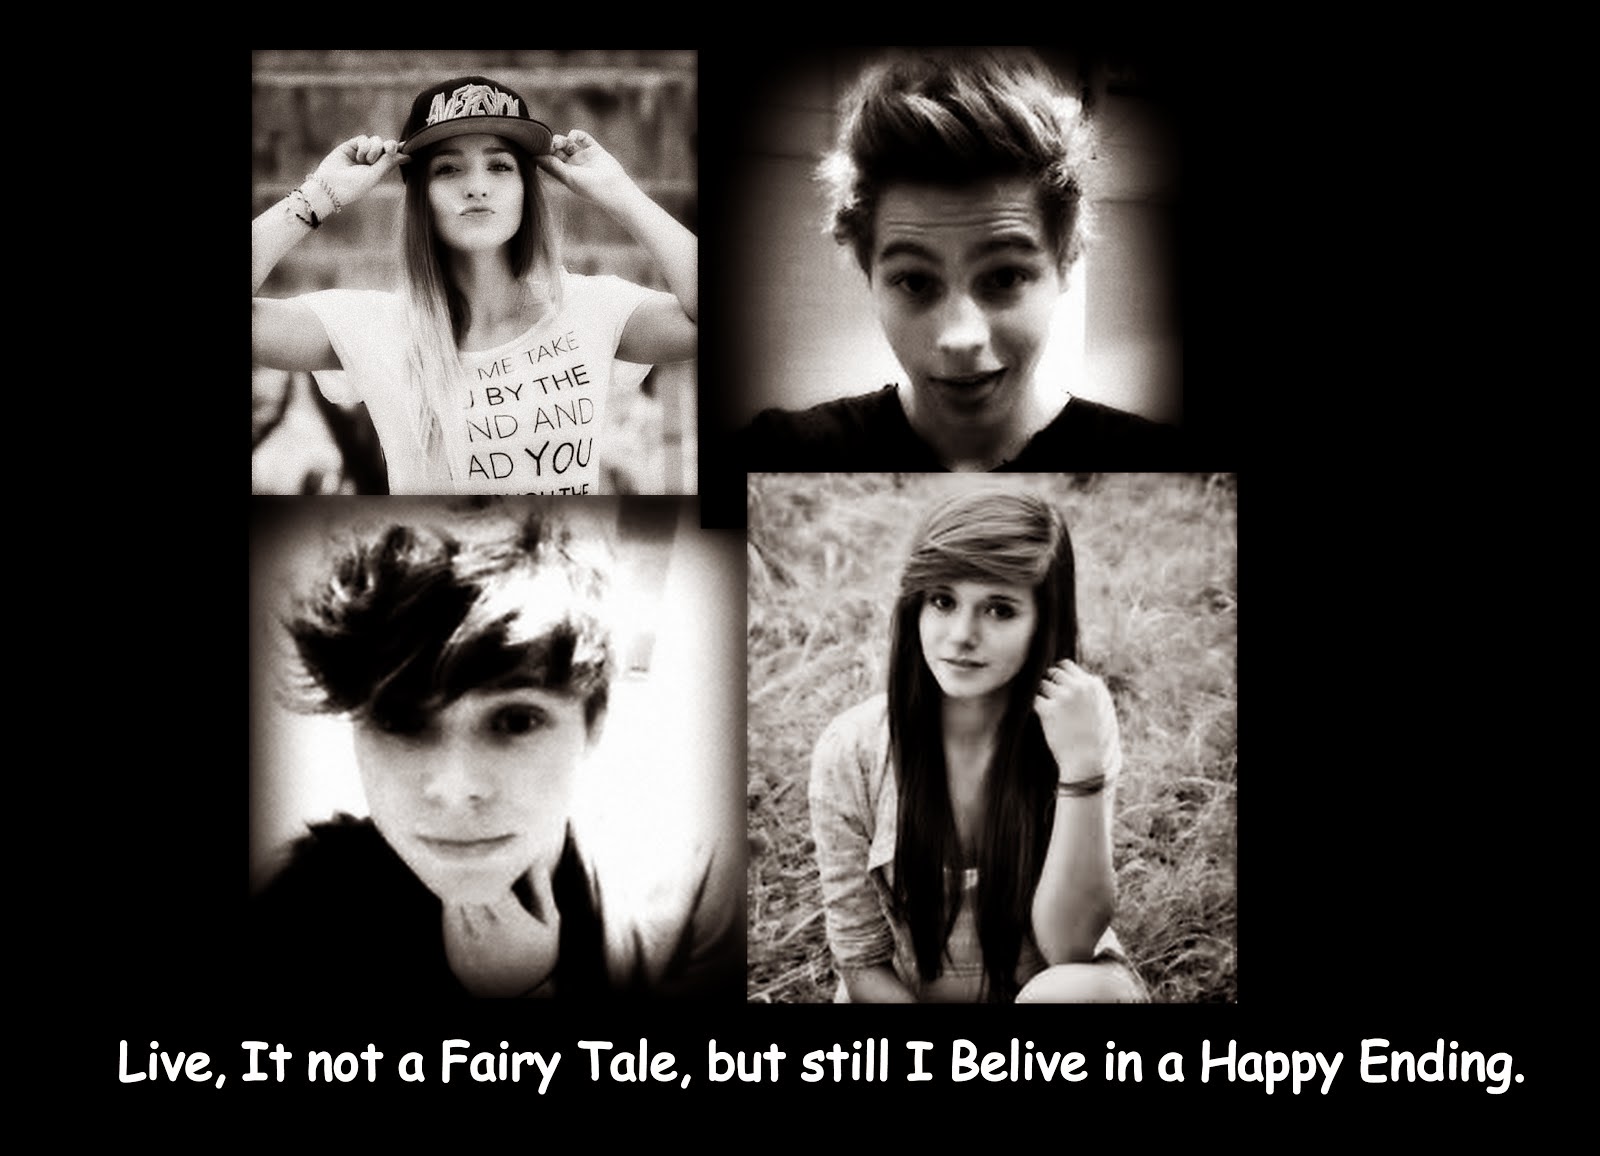 Live, It not a Fairy Tale, but still I Belive in a Happy Ending.